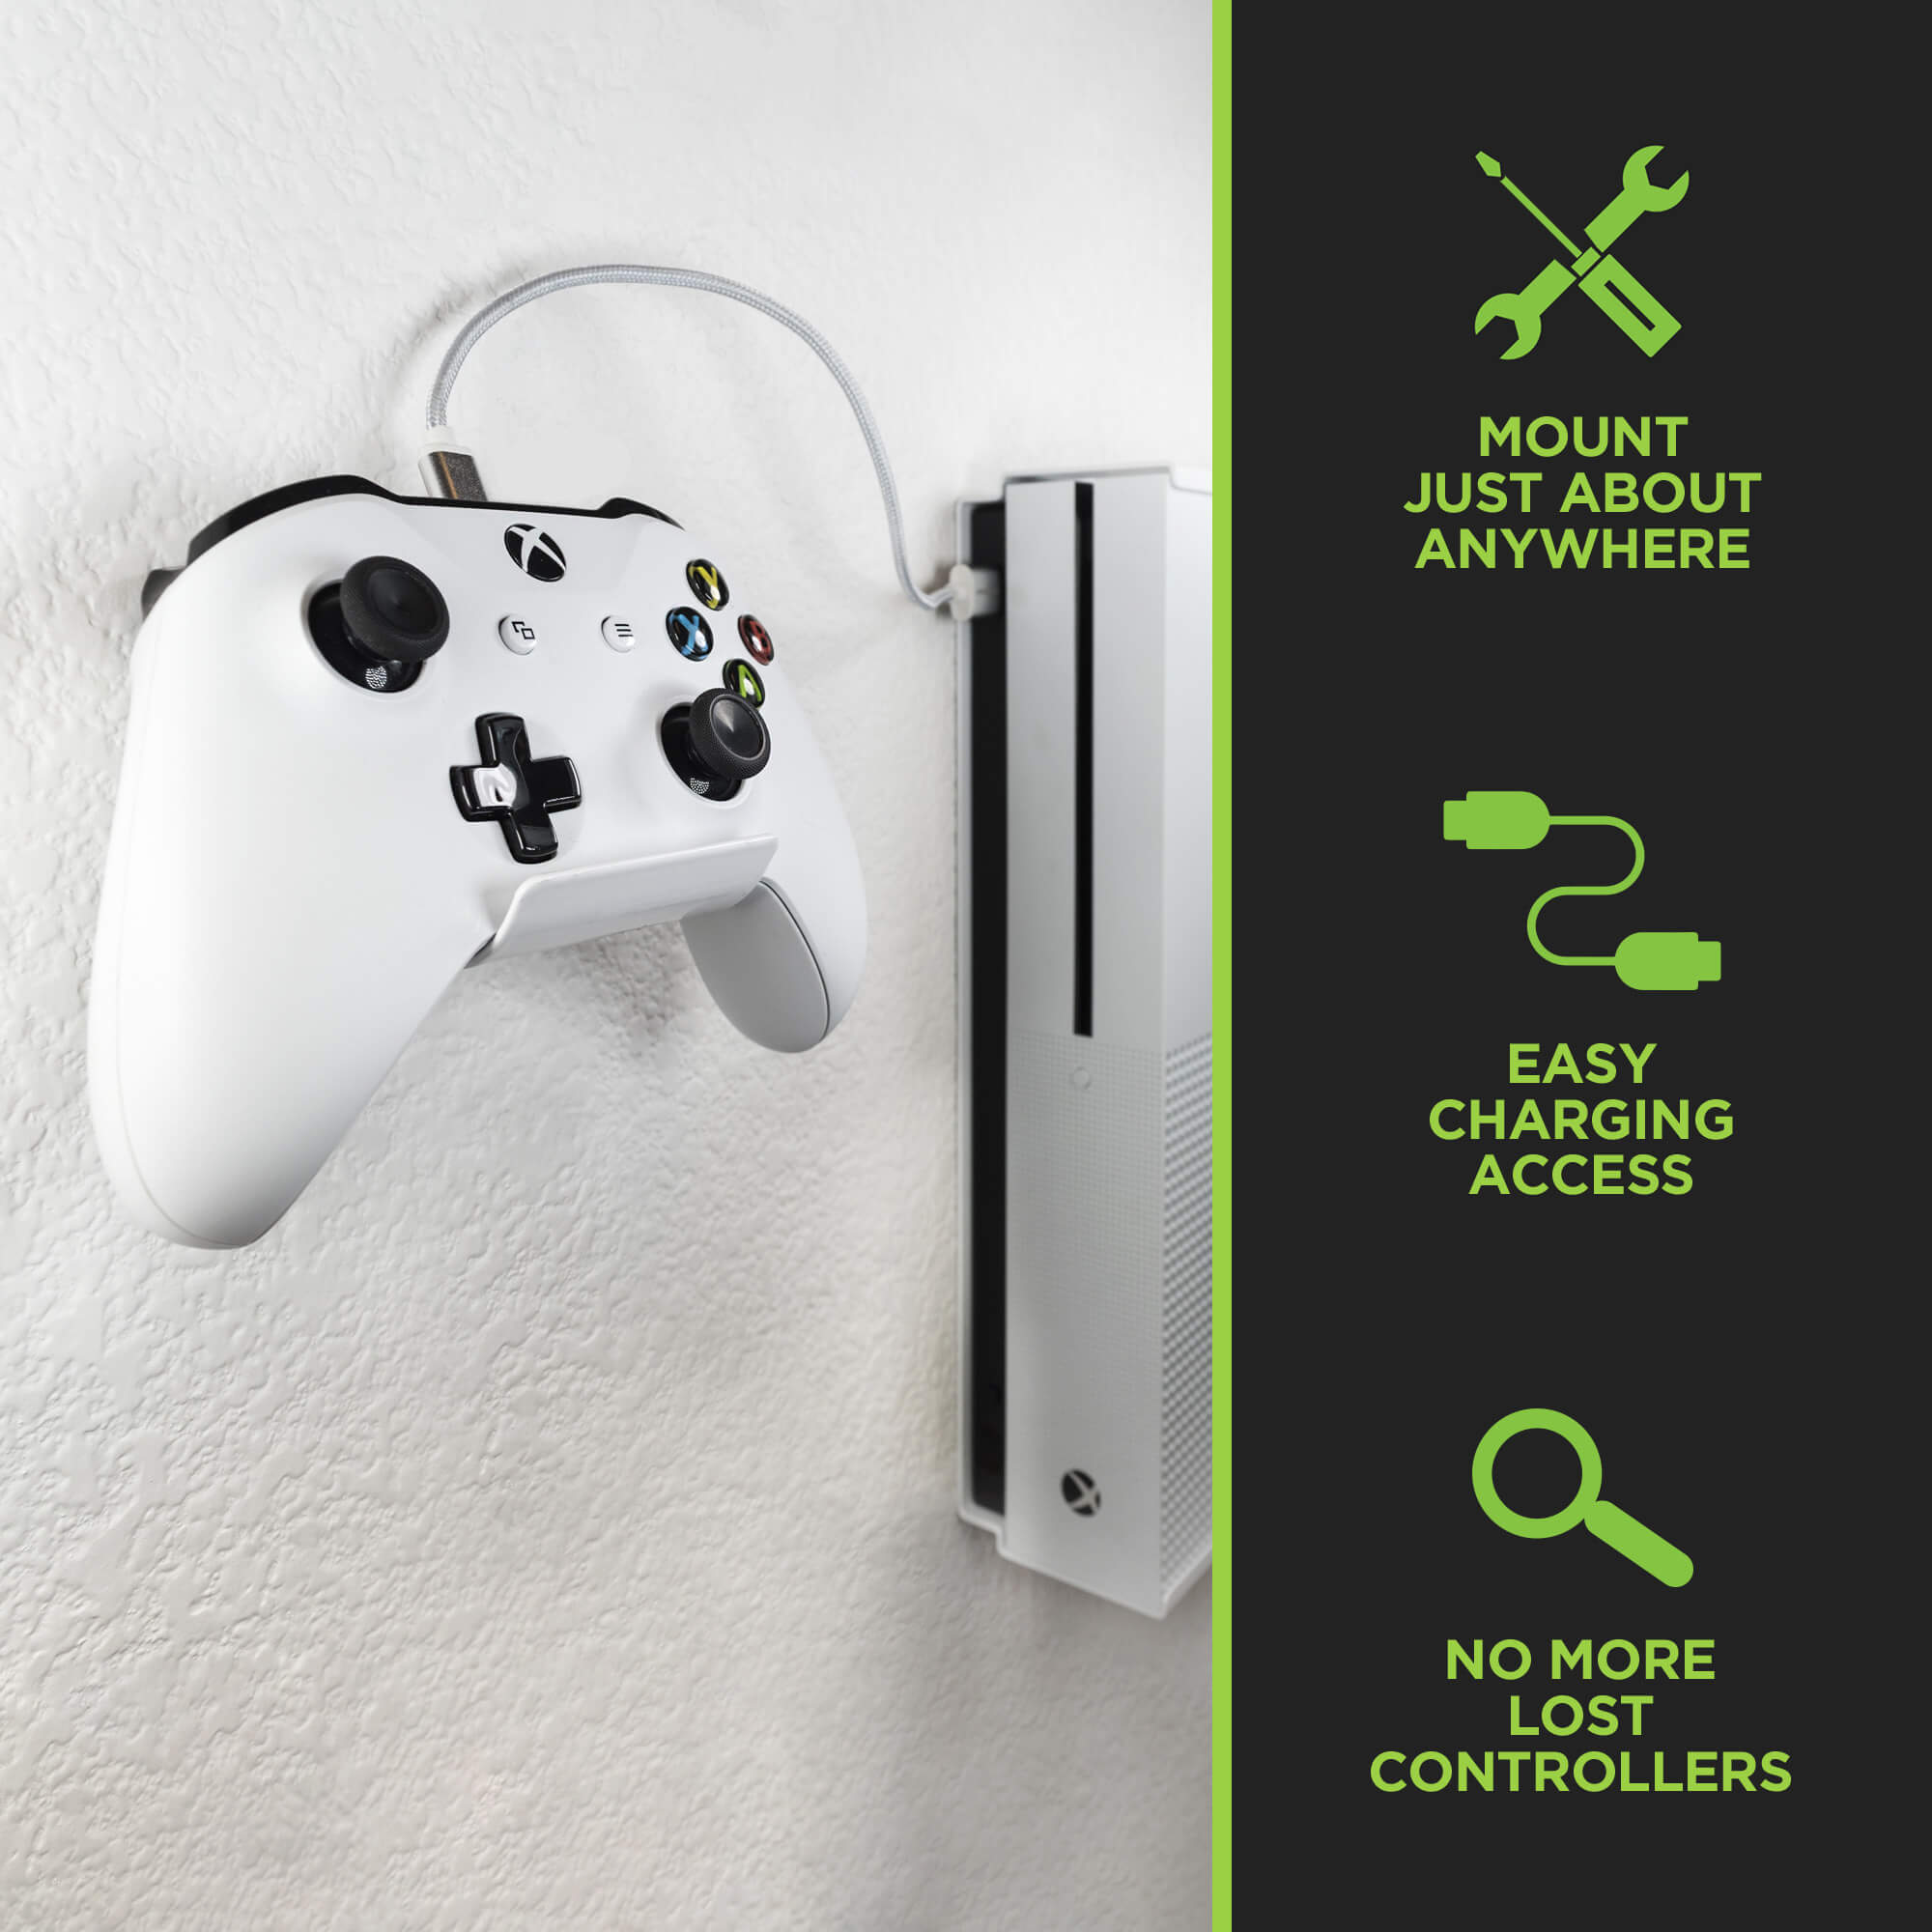 XBOX Controller Wall Mounts  Microsoft XBOX Compatible Mount